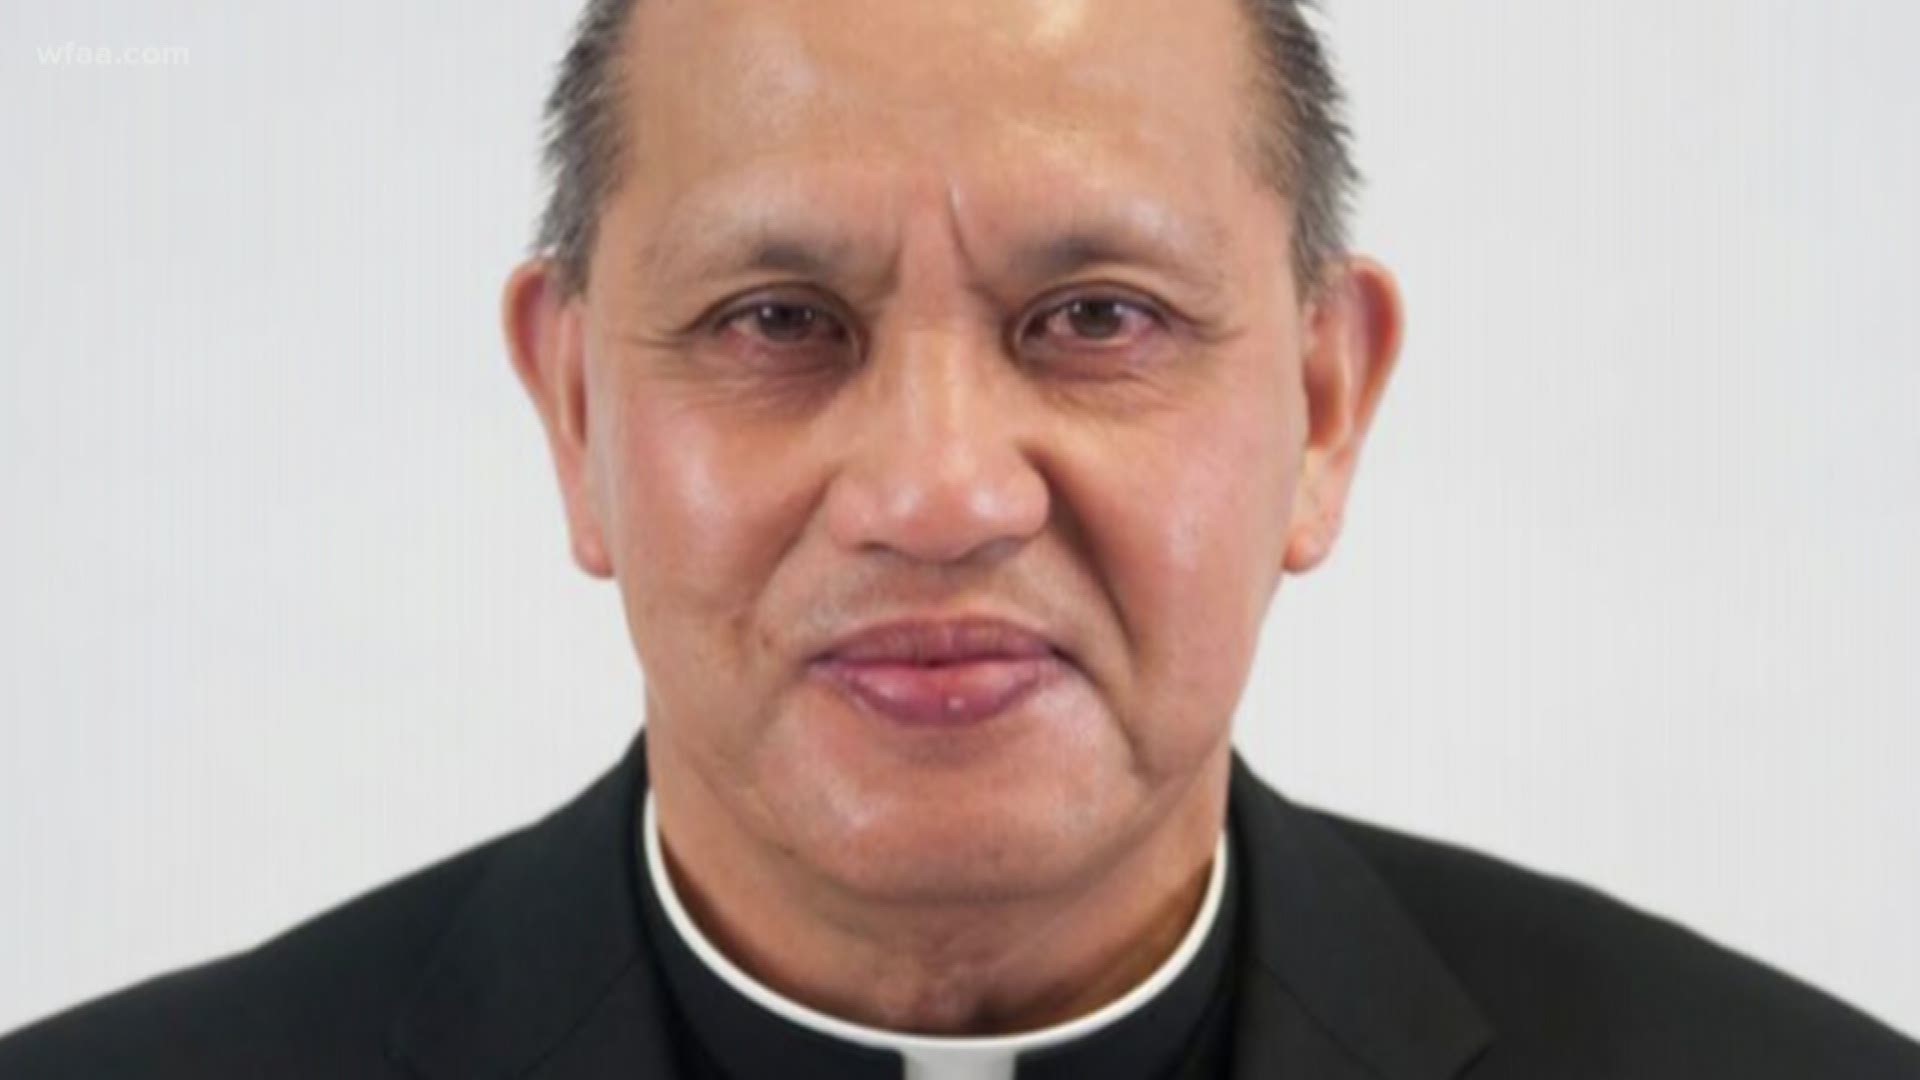 Officials have not been able to locate Rev. Edmundo Paredes since he left St. Cecilia Catholic Church in Dallas in 2017.